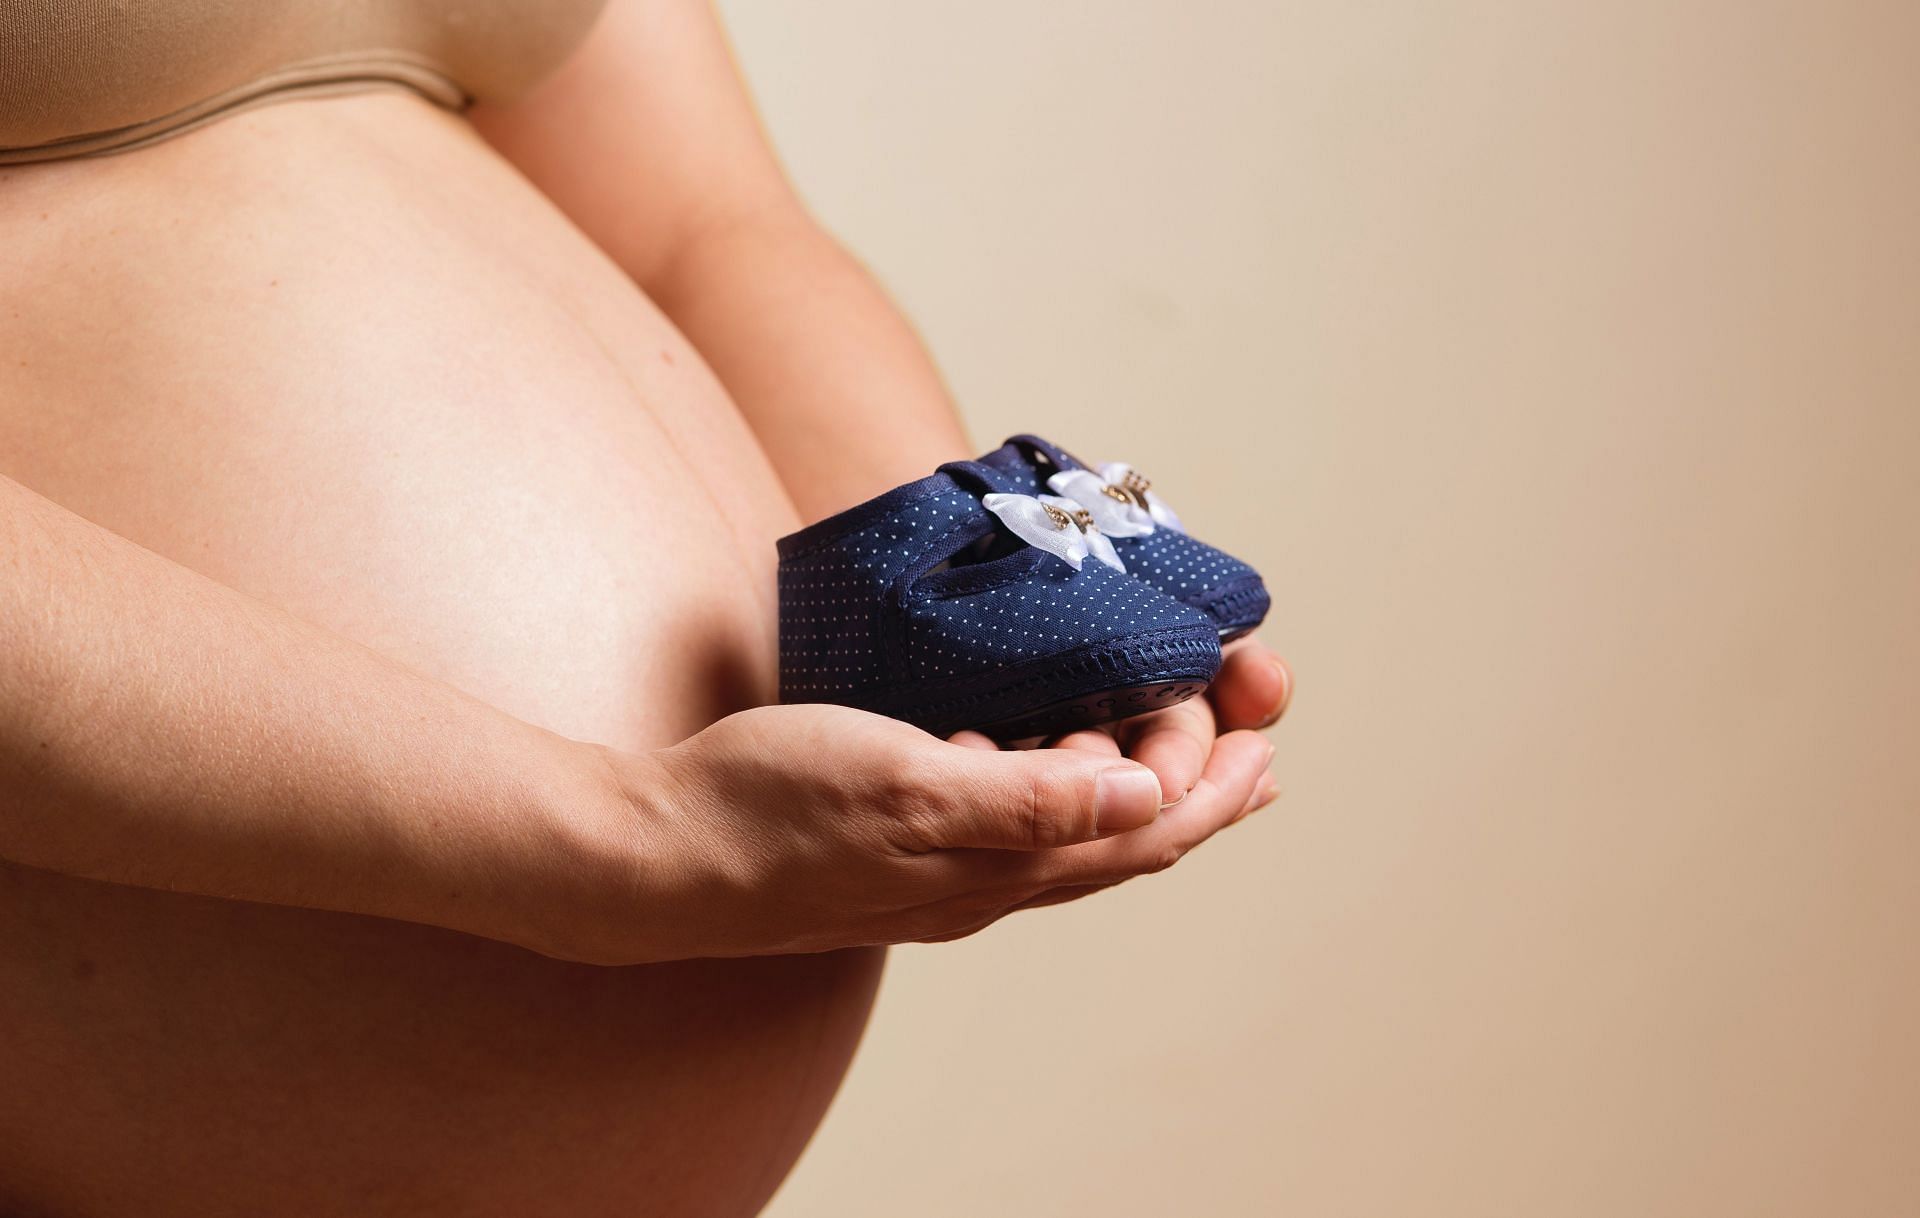 Ways to tighten excess skin after pregnancy (image via pexels / photo by Daniel)